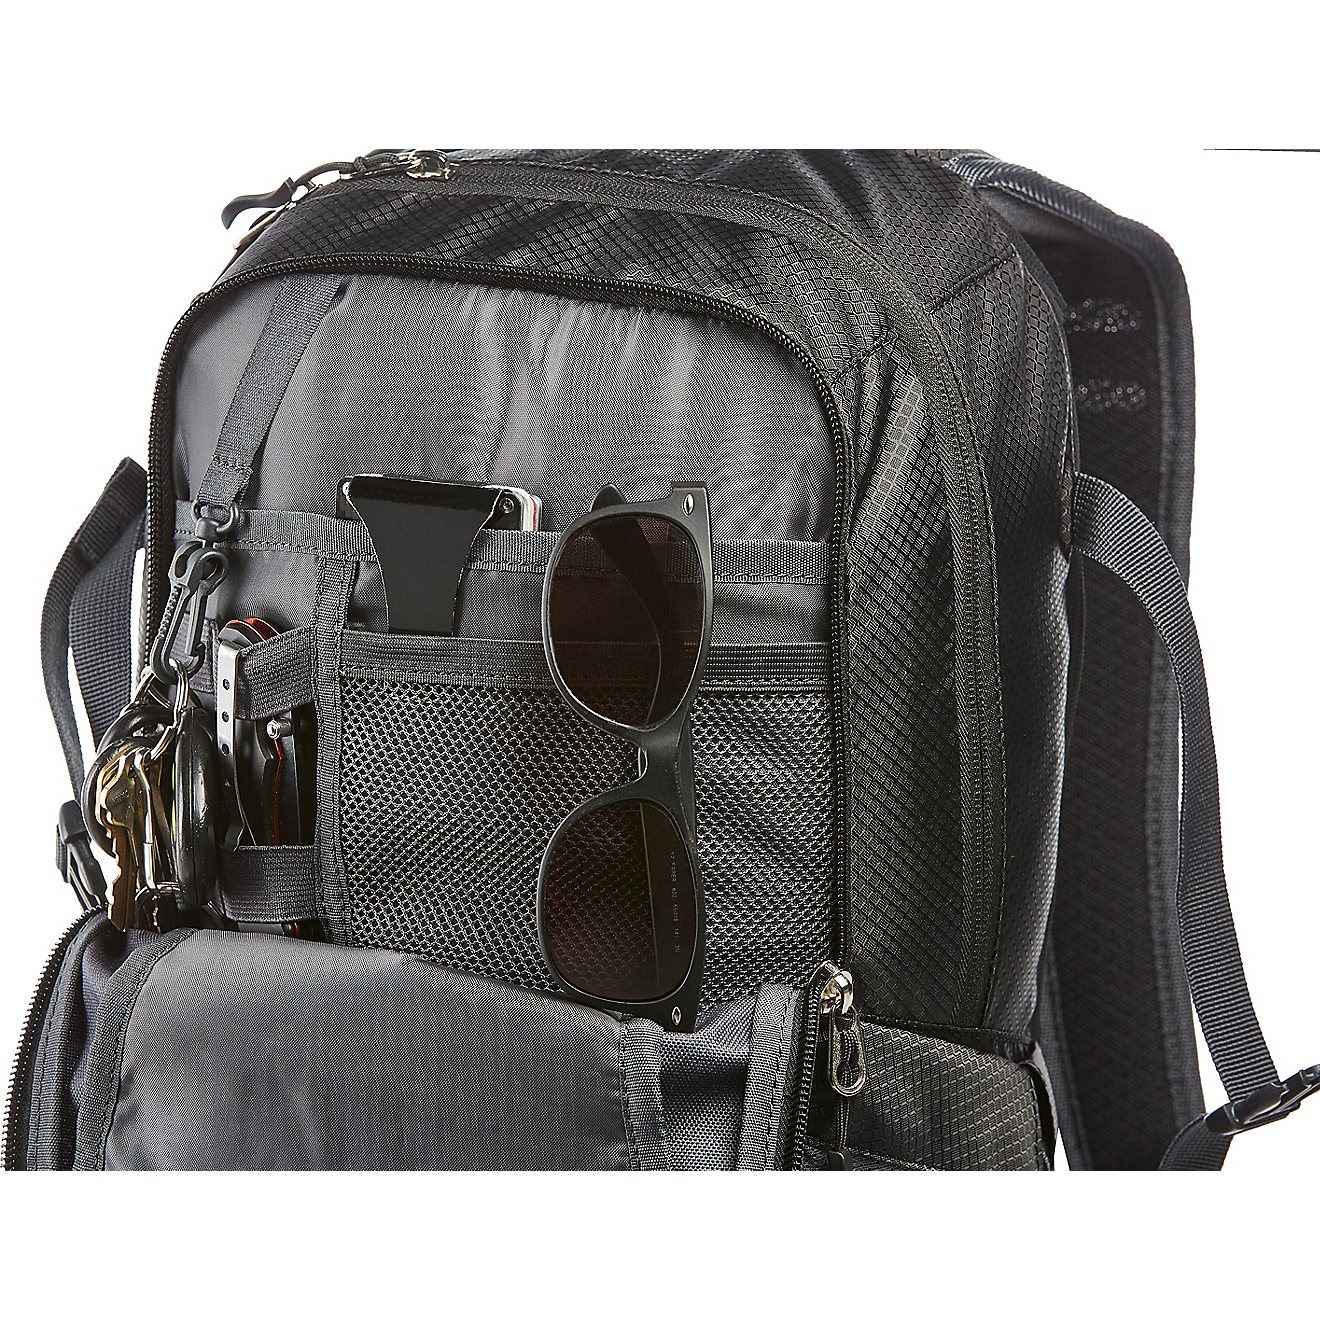 BCG 100 oz Hydration Pack | Free Shipping at Academy